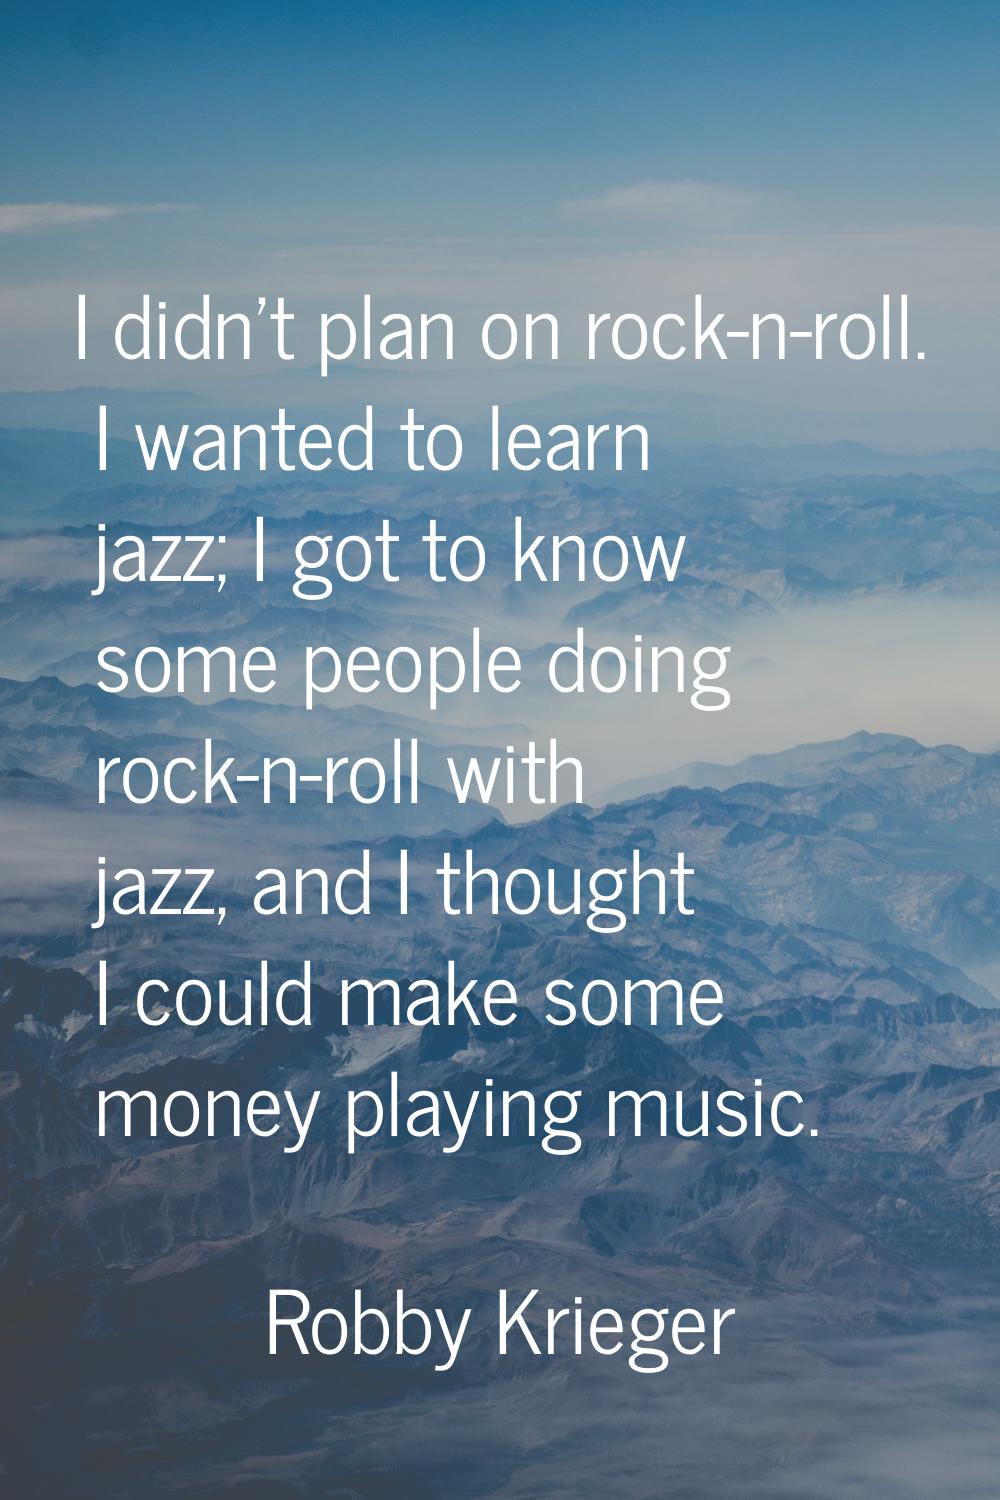 I didn't plan on rock-n-roll. I wanted to learn jazz; I got to know some people doing rock-n-roll w